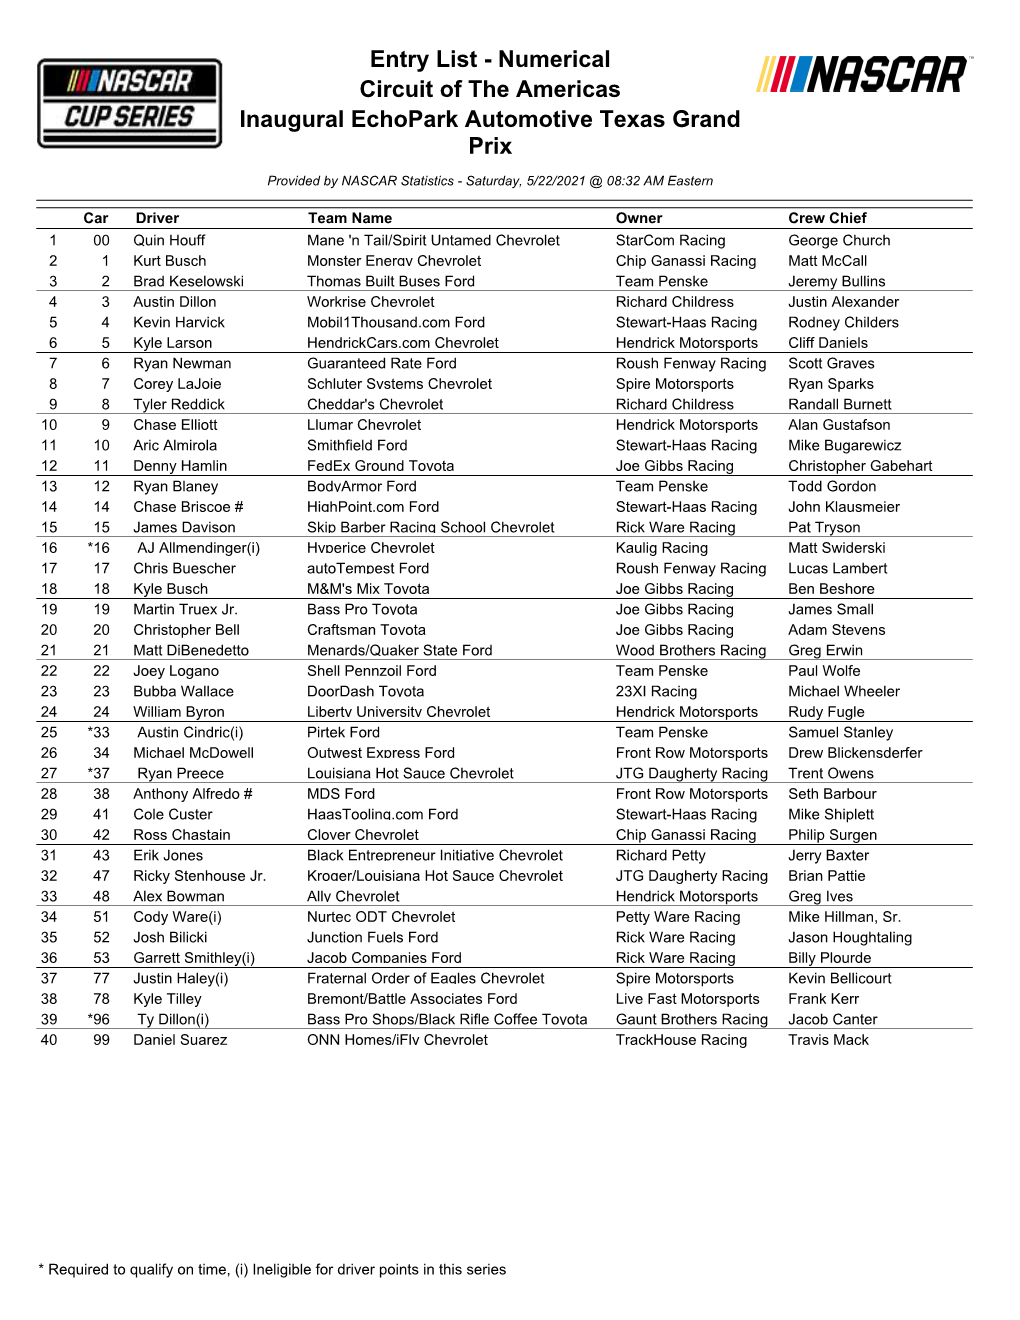 Entry List - Numerical Circuit of the Americas Inaugural Echopark Automotive Texas Grand Prix